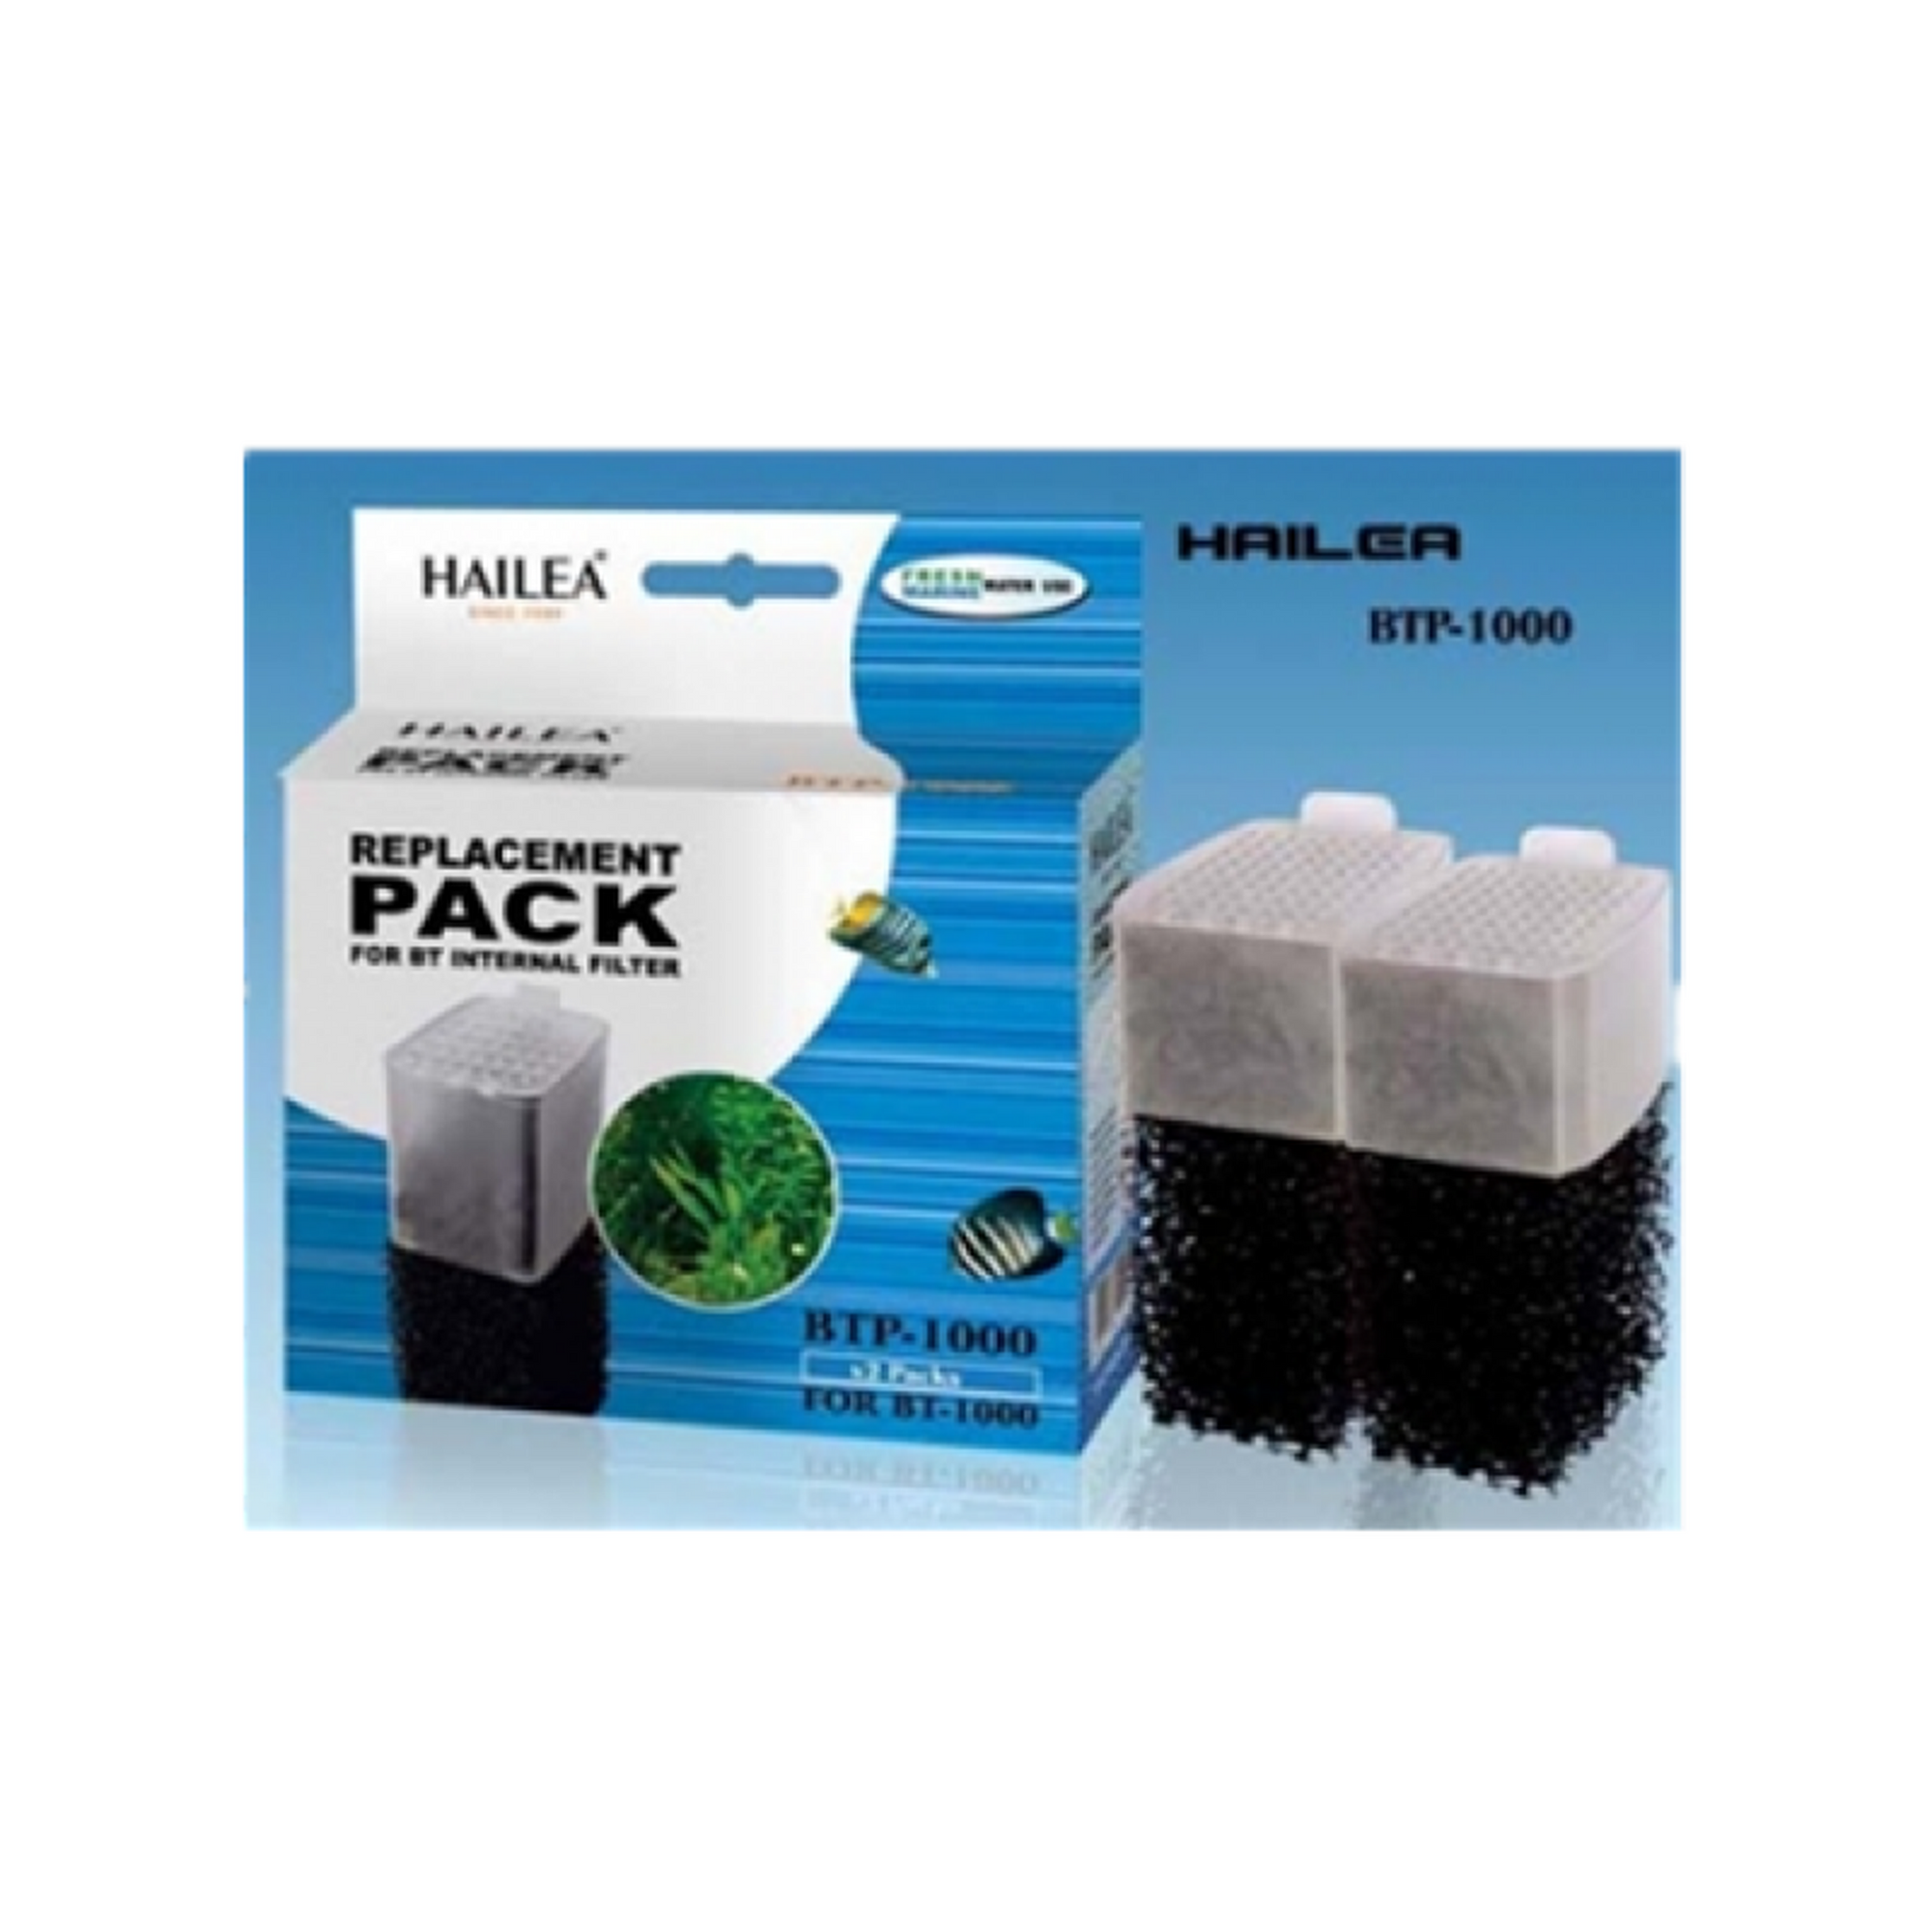 Haillea replacement cartridge BTP-1000, pack of two. Designed for use with Hailea BT1000 internal filter. Provides efficient filtration for clean and healthy aquarium water. Quick and easy to replace."